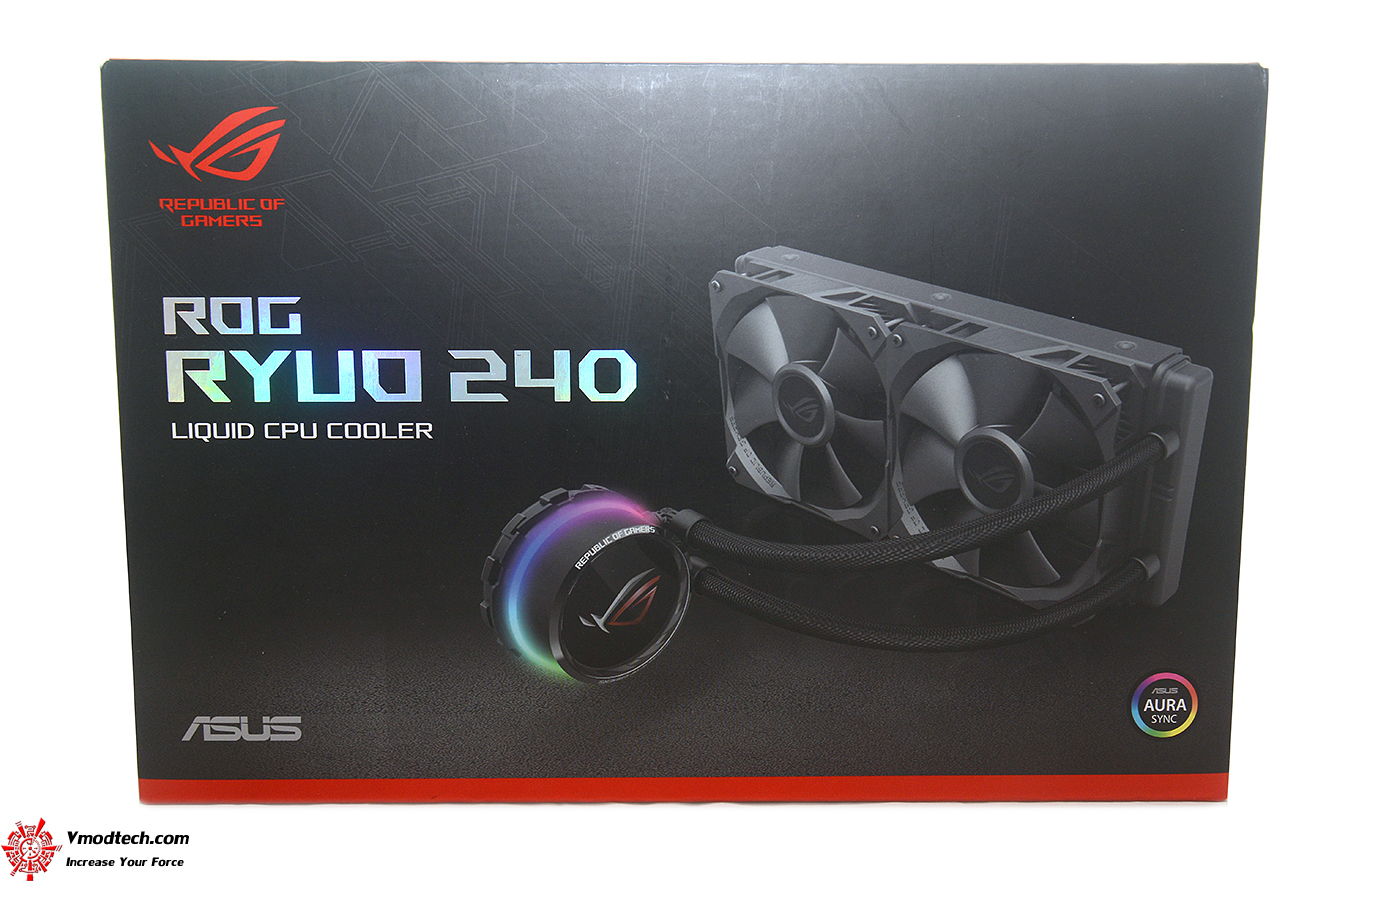 dsc 0571 ASUS ROG Ryuo 240 all in one liquid CPU cooler Review